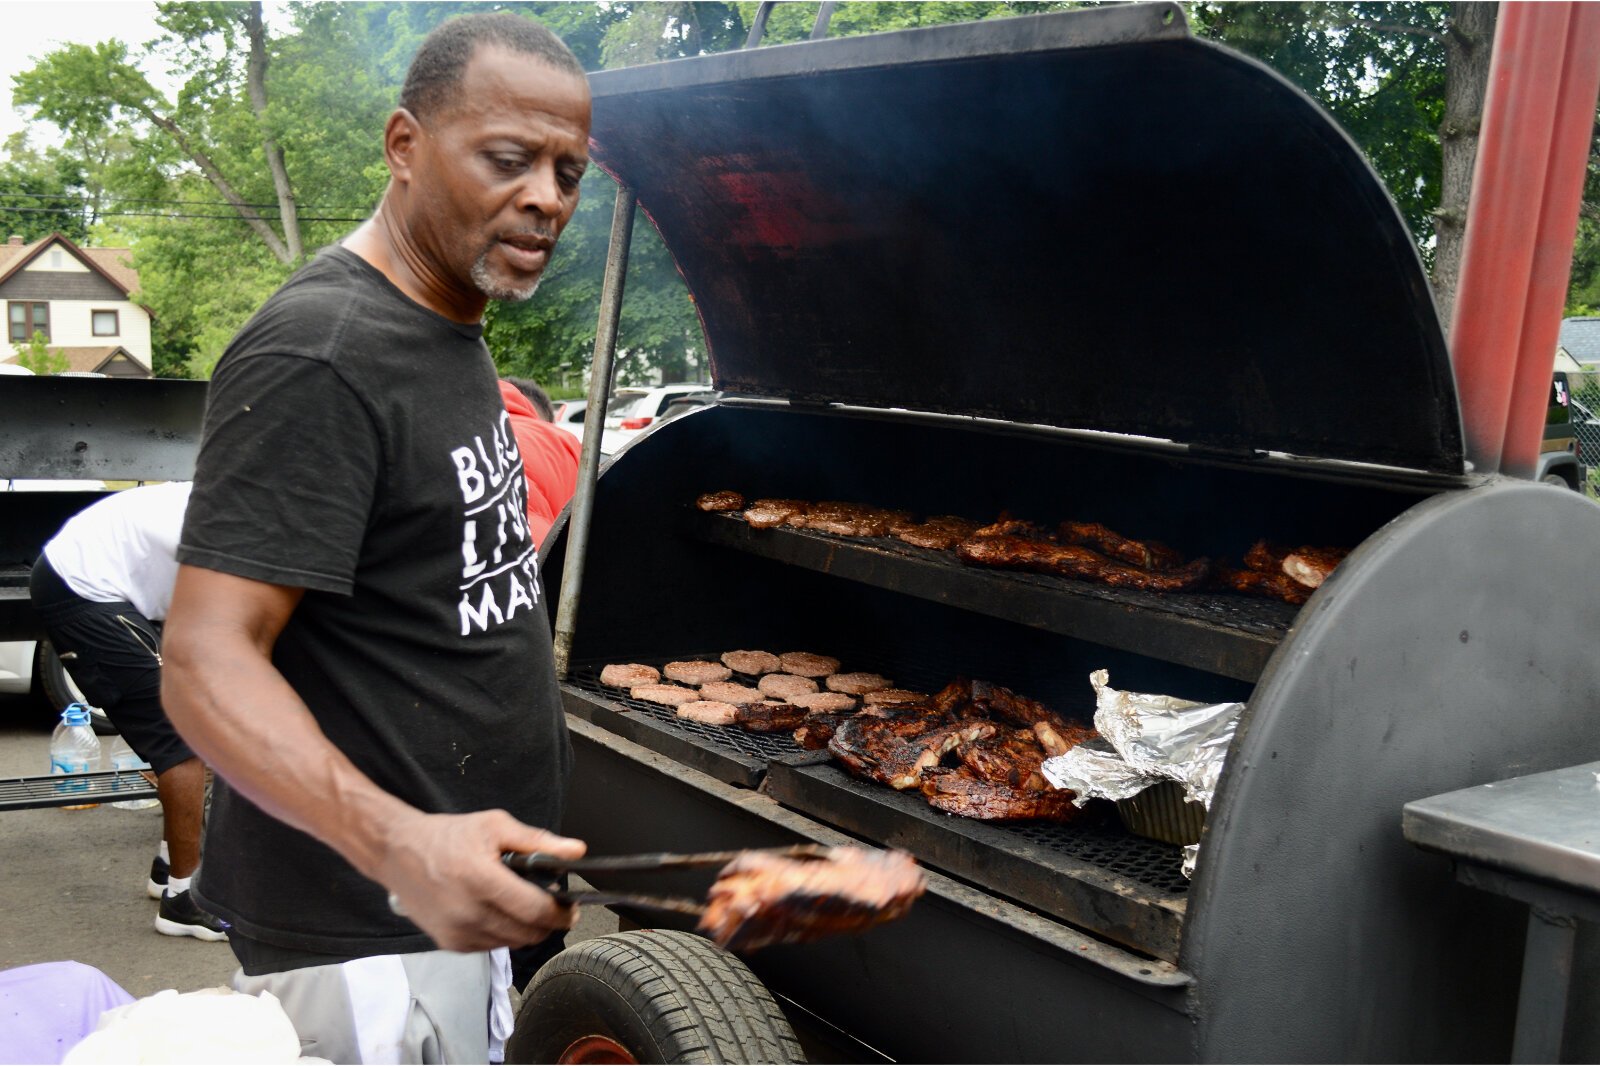 One Man and a Grill serves up as much meat as needed for the Gun Violence Resource and Resilience Rally.